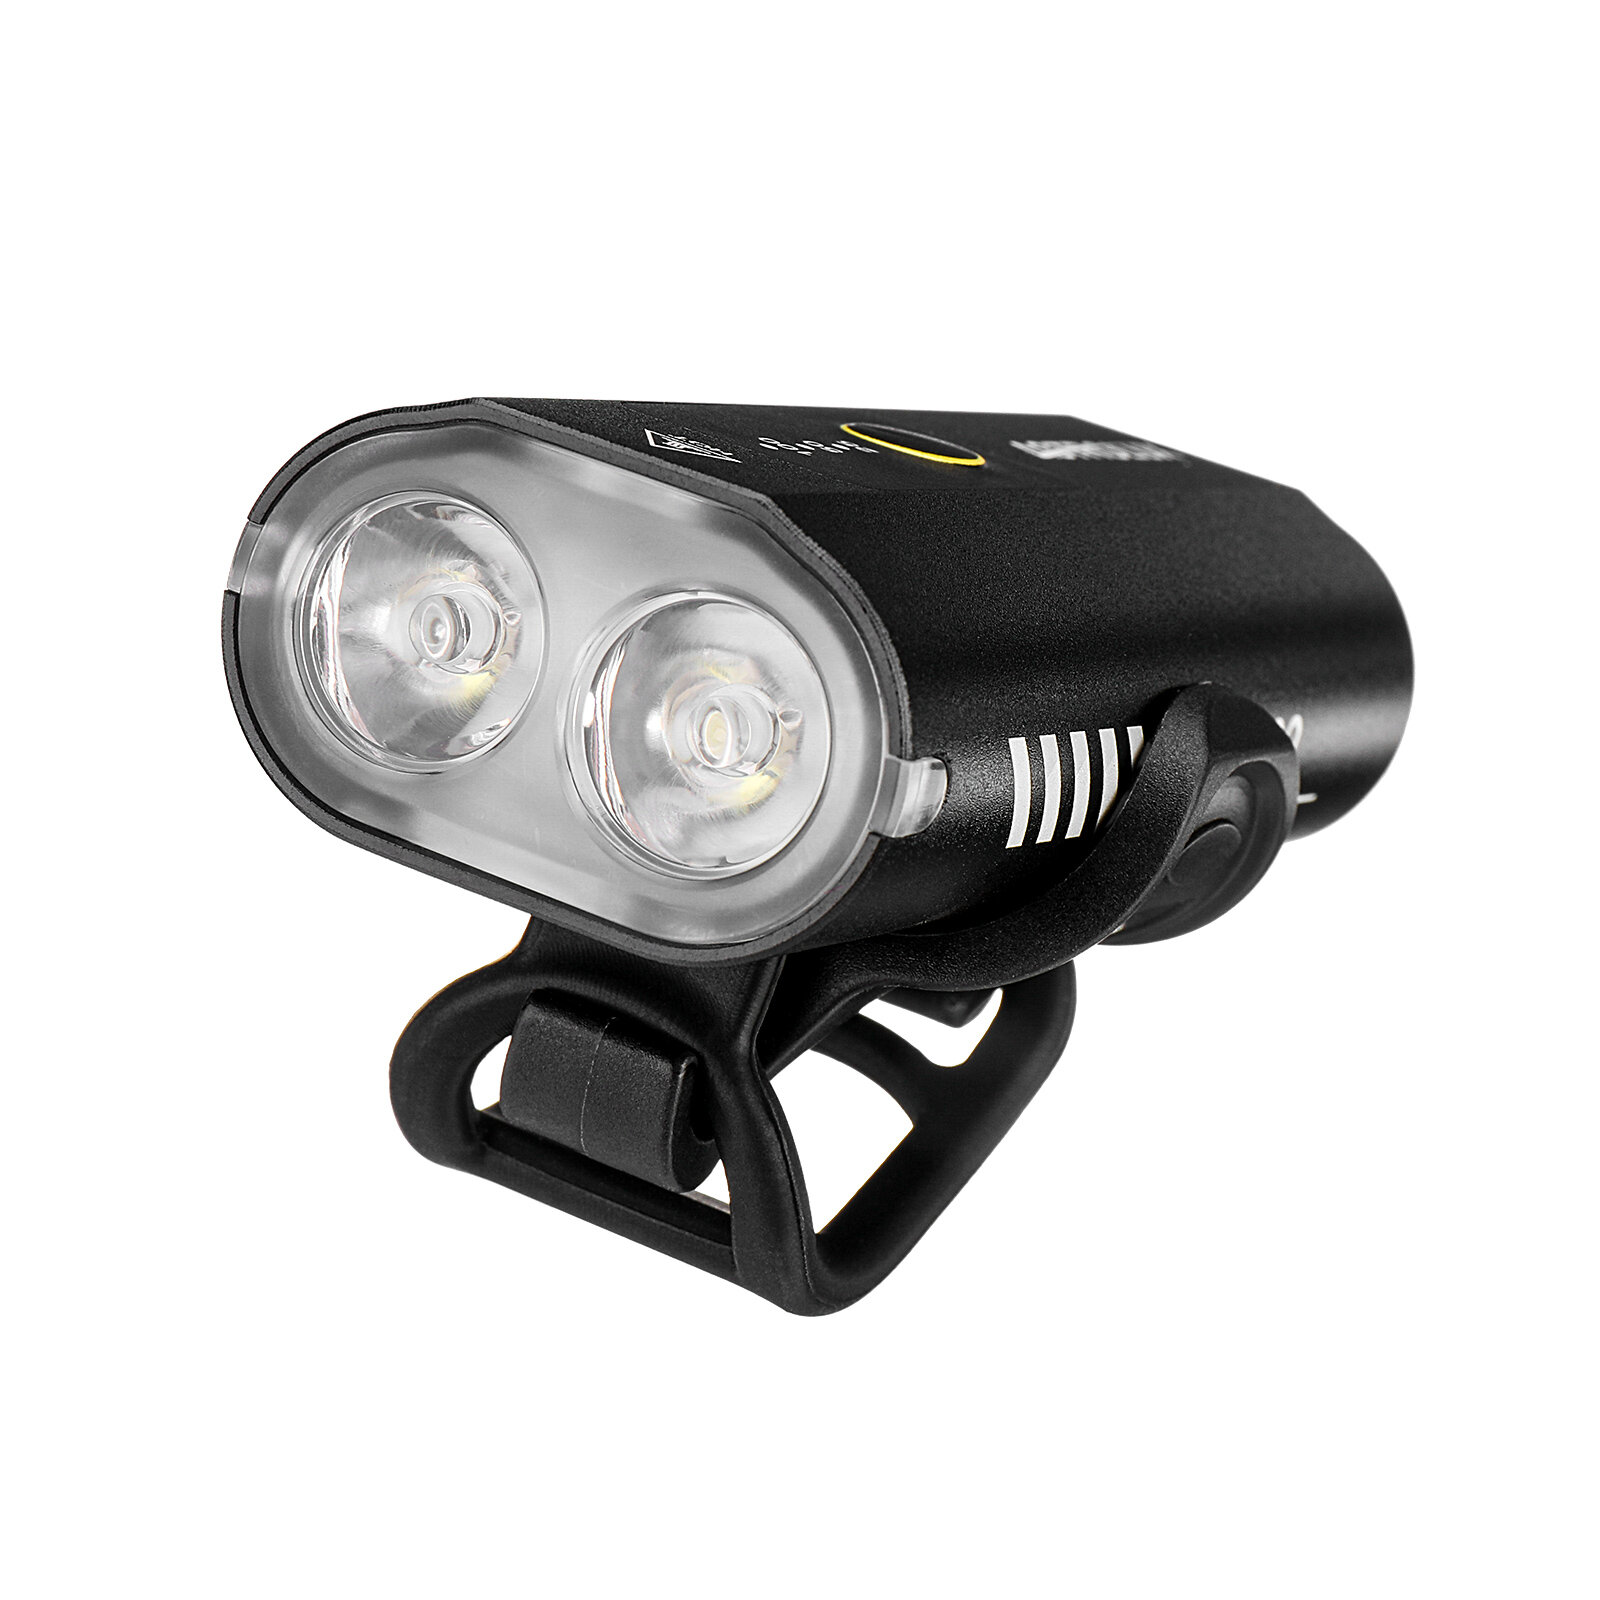 Astrolux® BC2 Double 800LM LED Bright Bike Light 2600mAh Battery IP64 Waterproof 5 Light Modes Type-C Rechargeable Bicycle Front Light Flashlight COD